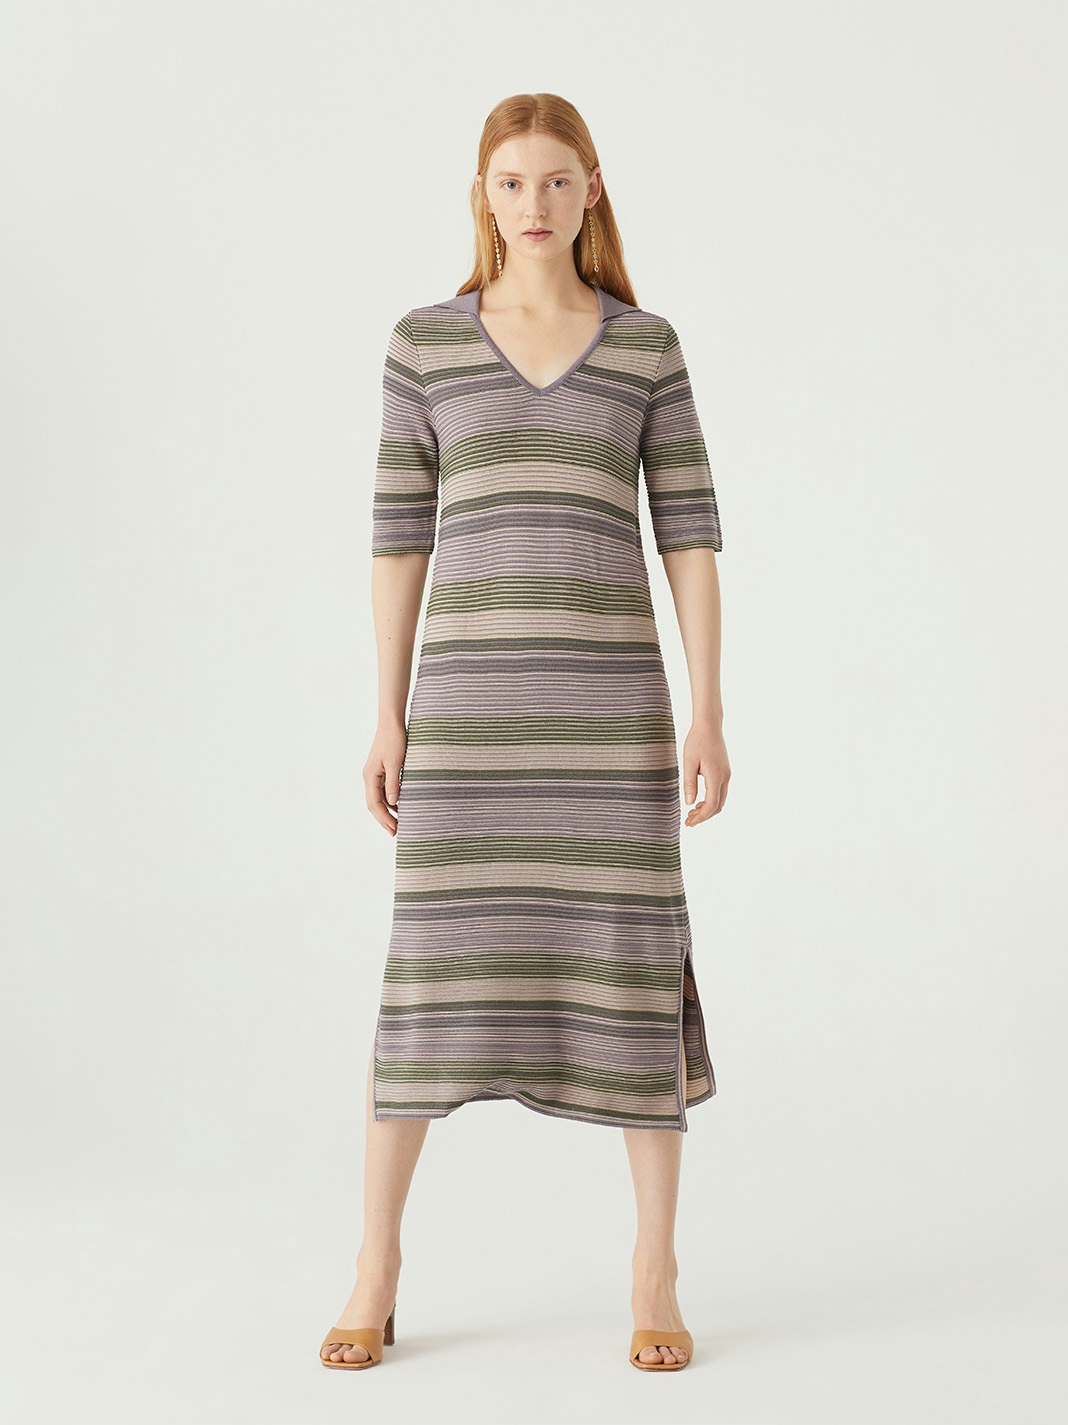 Tricolour ribbed dress